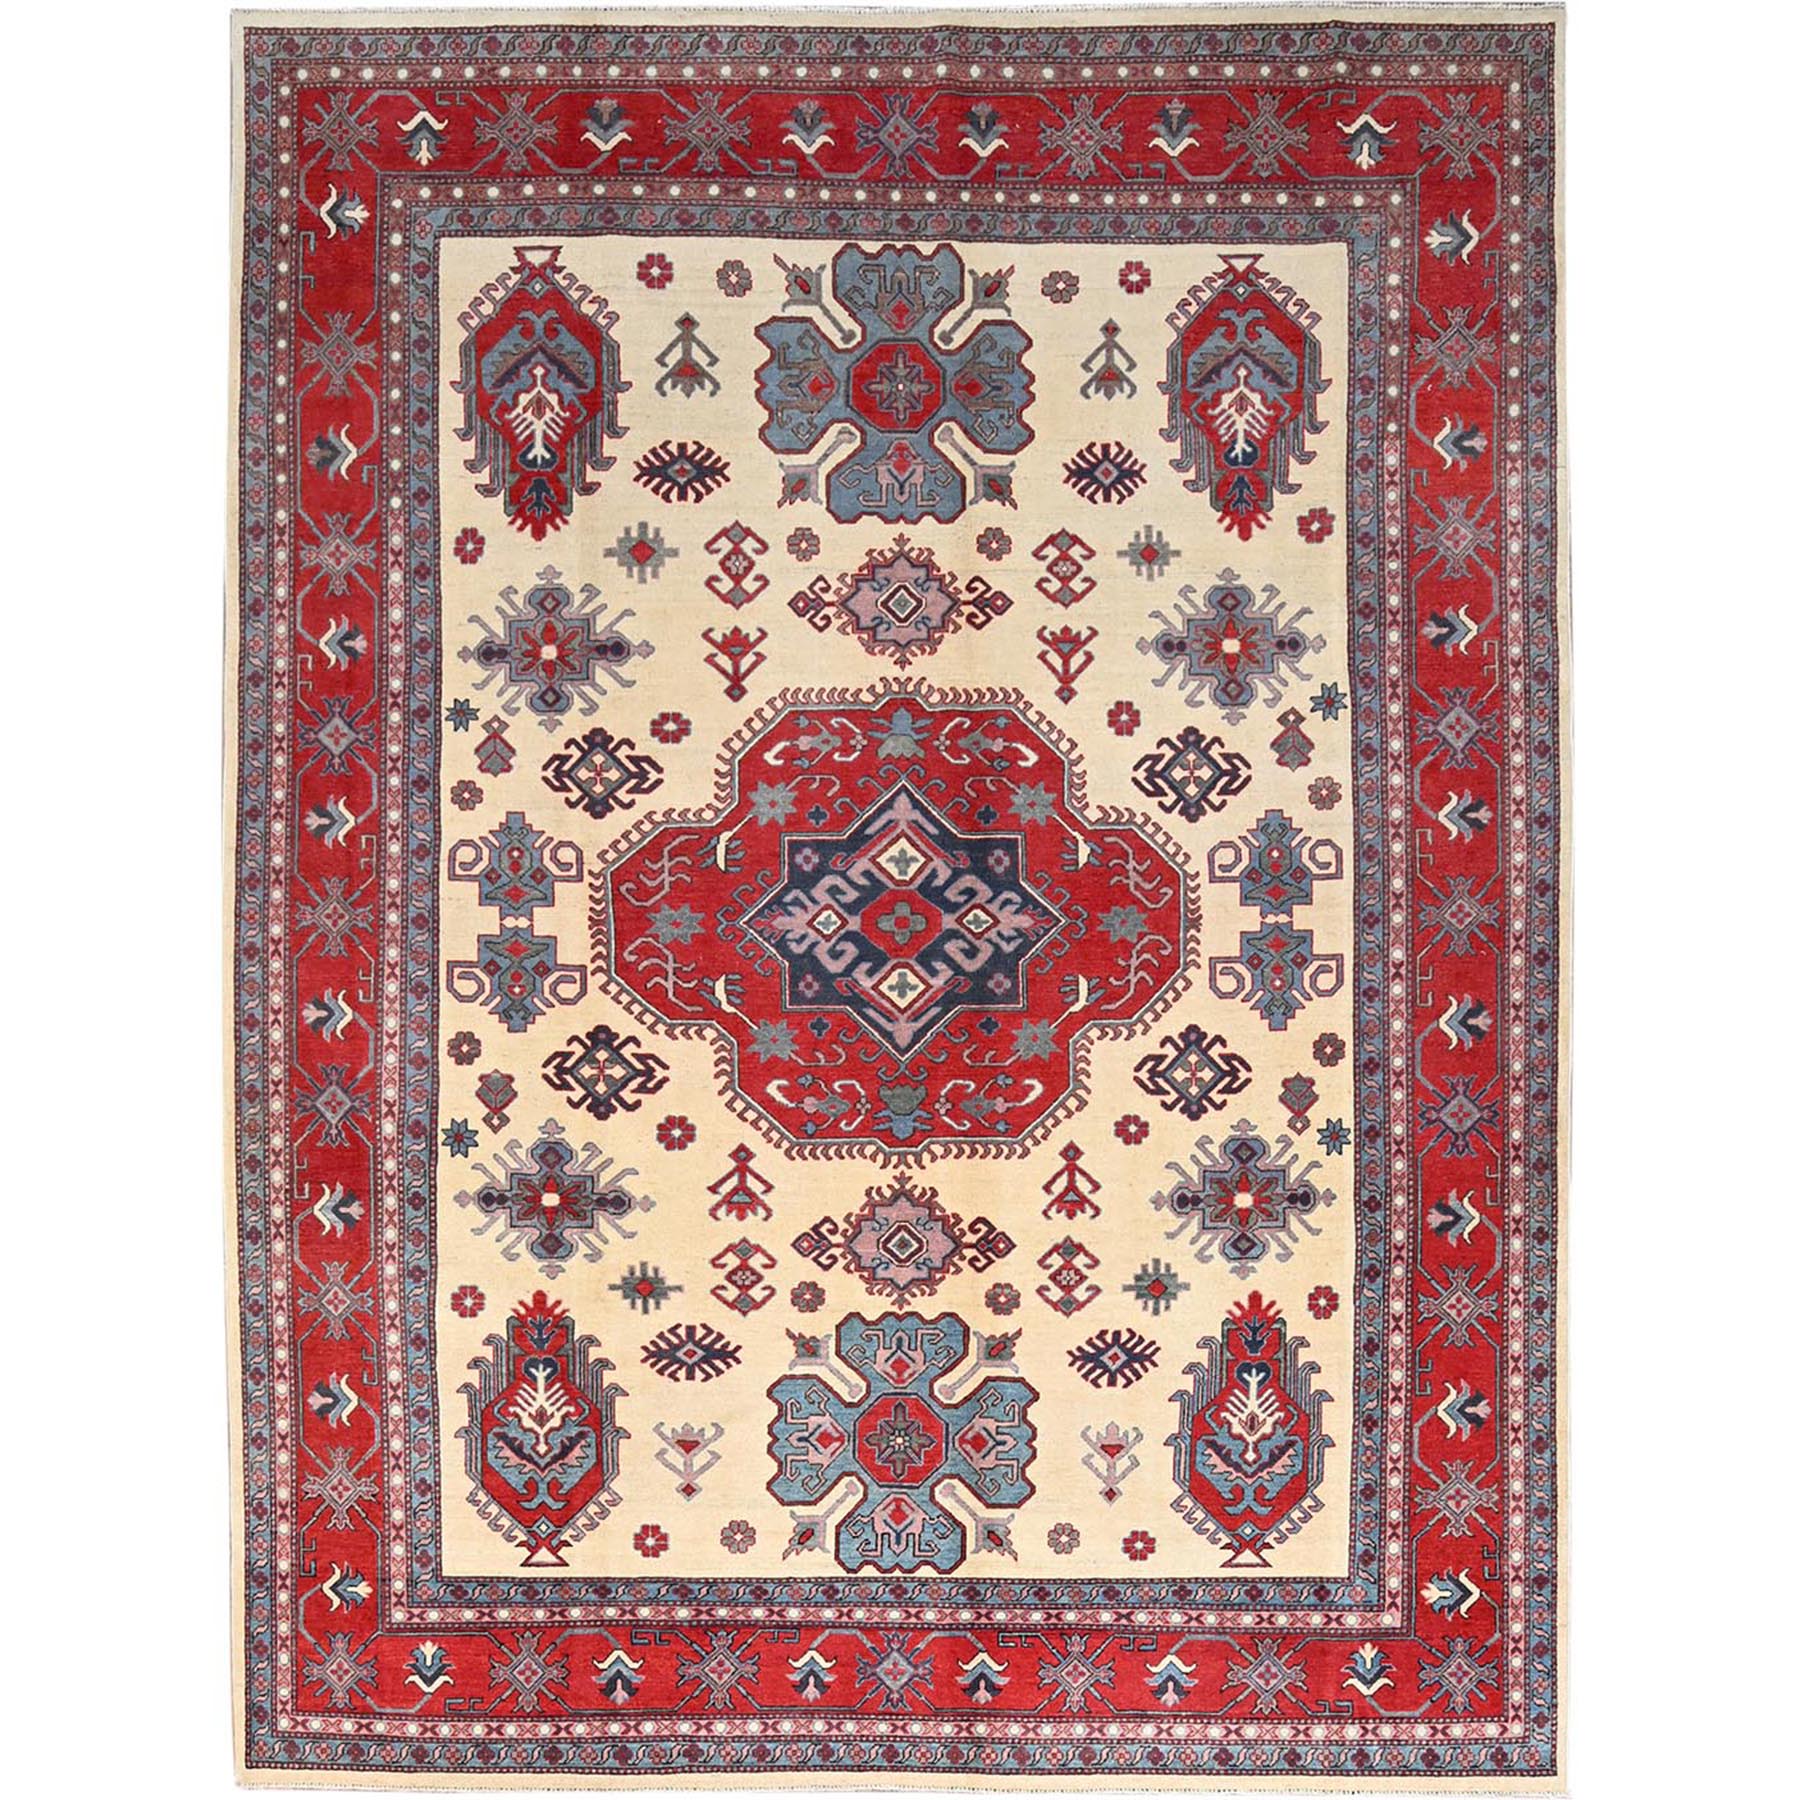 Casablanca White, Natural Dyes,  Hand Knotted With Densely Woven 100% Wool Kazak, Tribal Pattern, Oriental Rug 